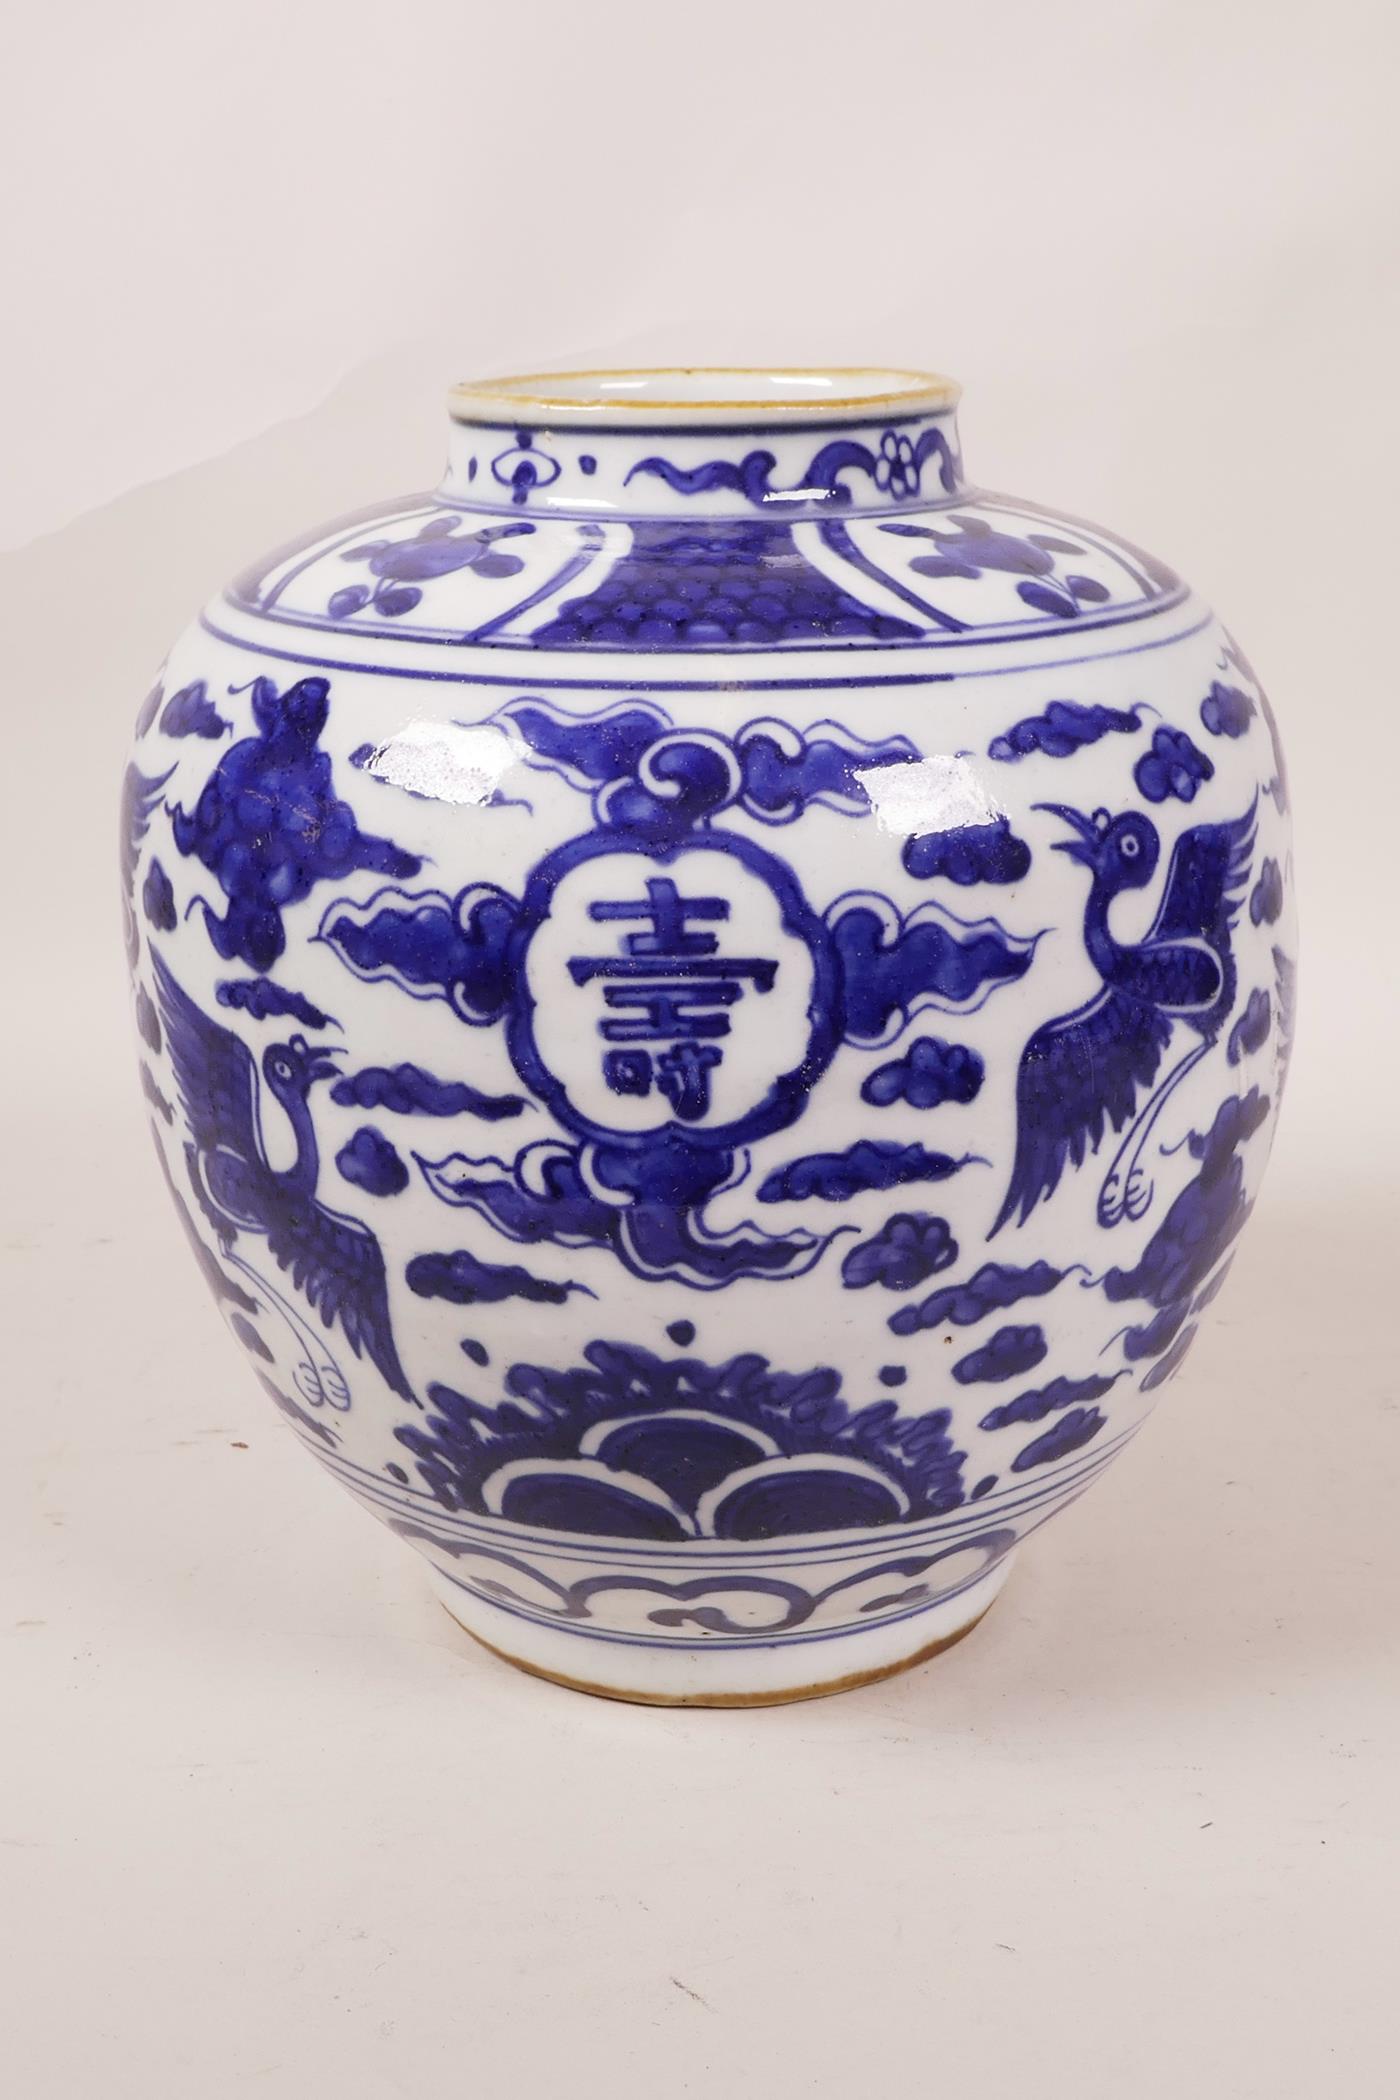 A Chinese blue and white porcelain ginger jar decorated with cranes in flight and auspicious - Image 2 of 5